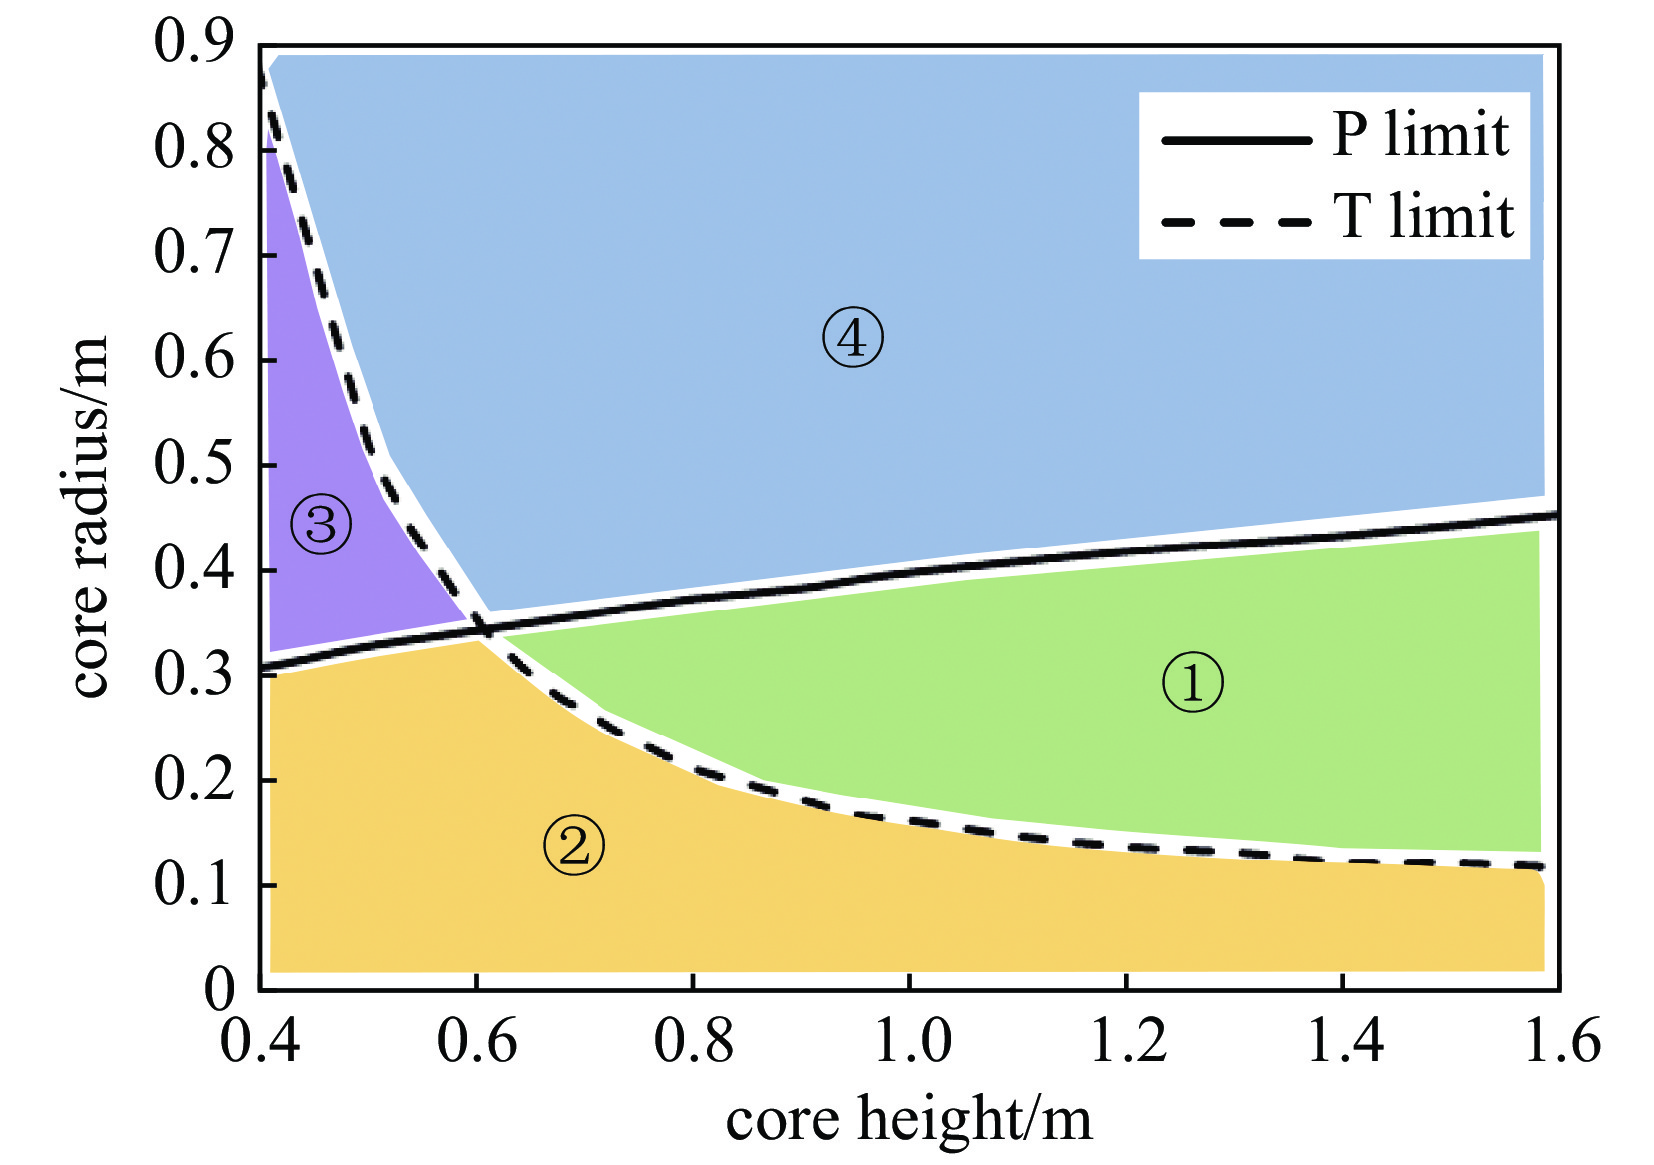 Design range of core size under P and T limits